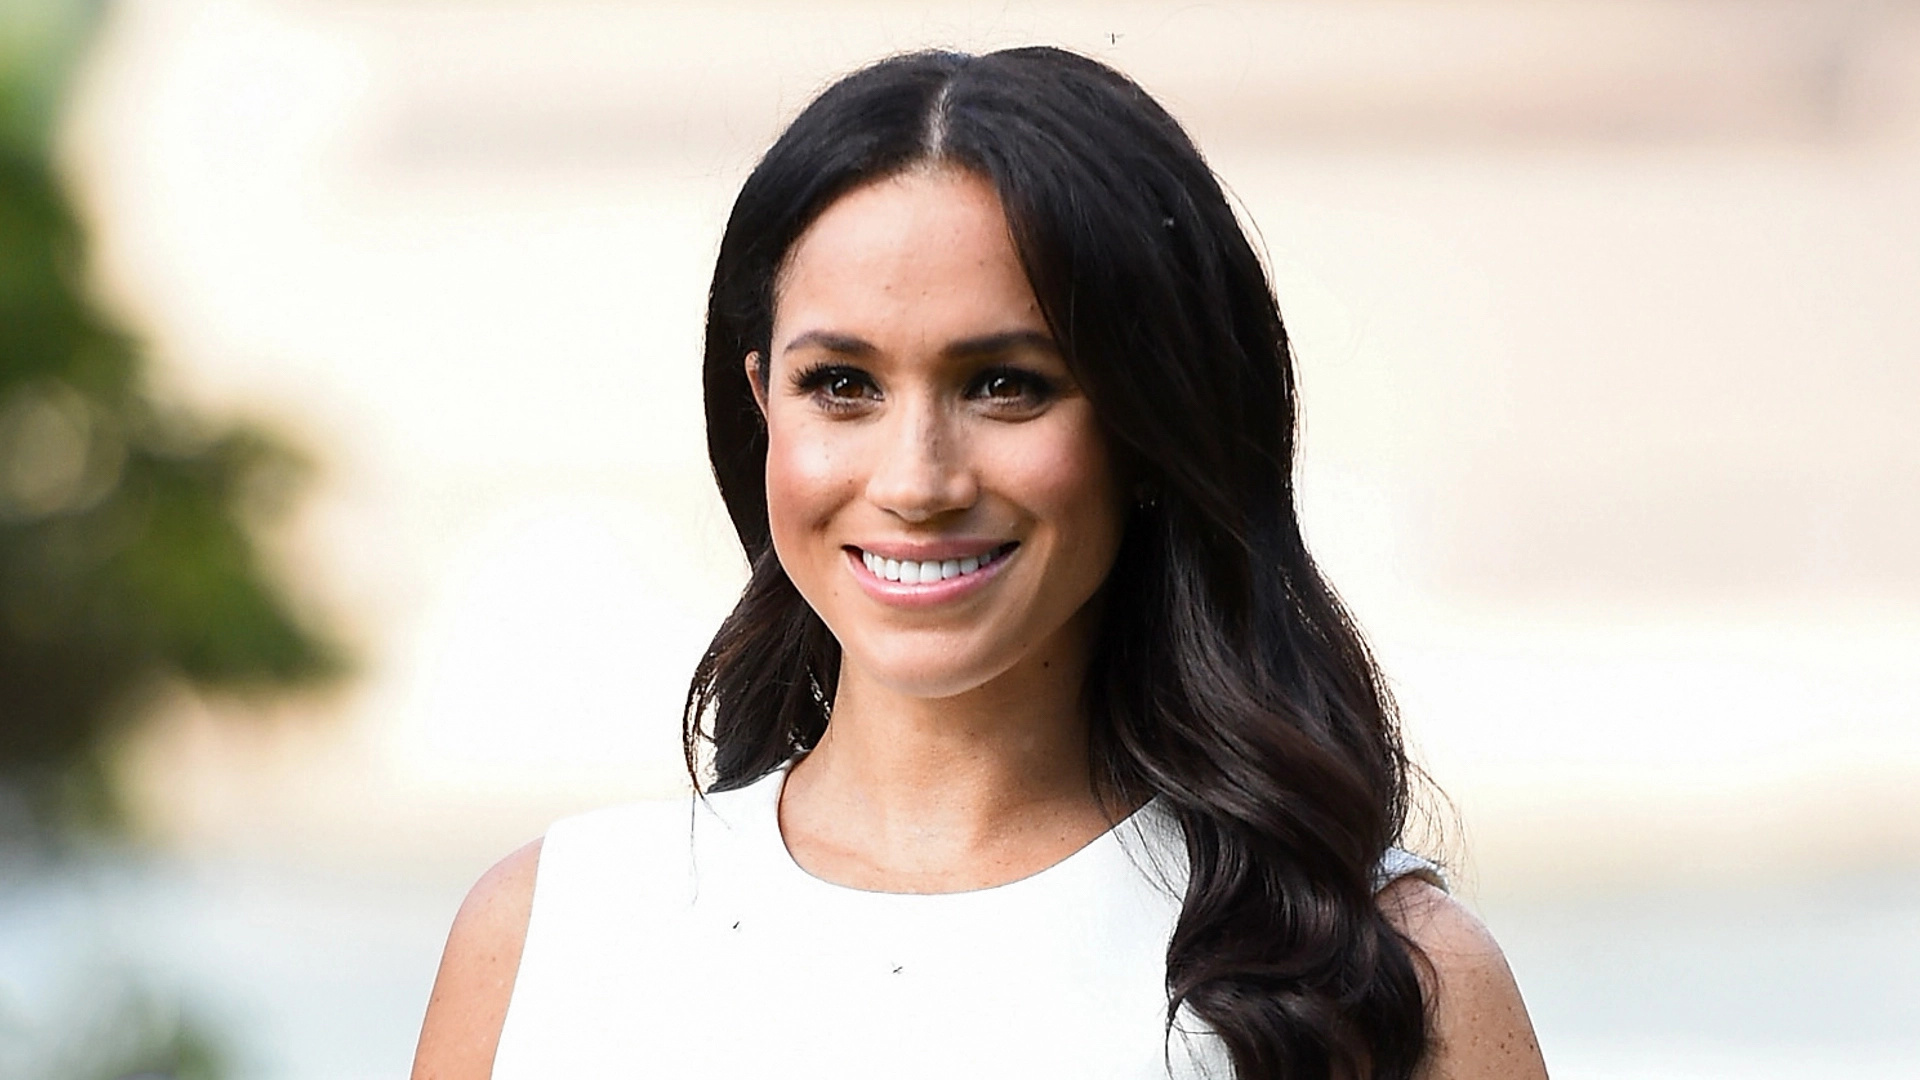 Meghan Markle's future baby, Name hint, Speculation, Pregnancy excitement, 1920x1080 Full HD Desktop